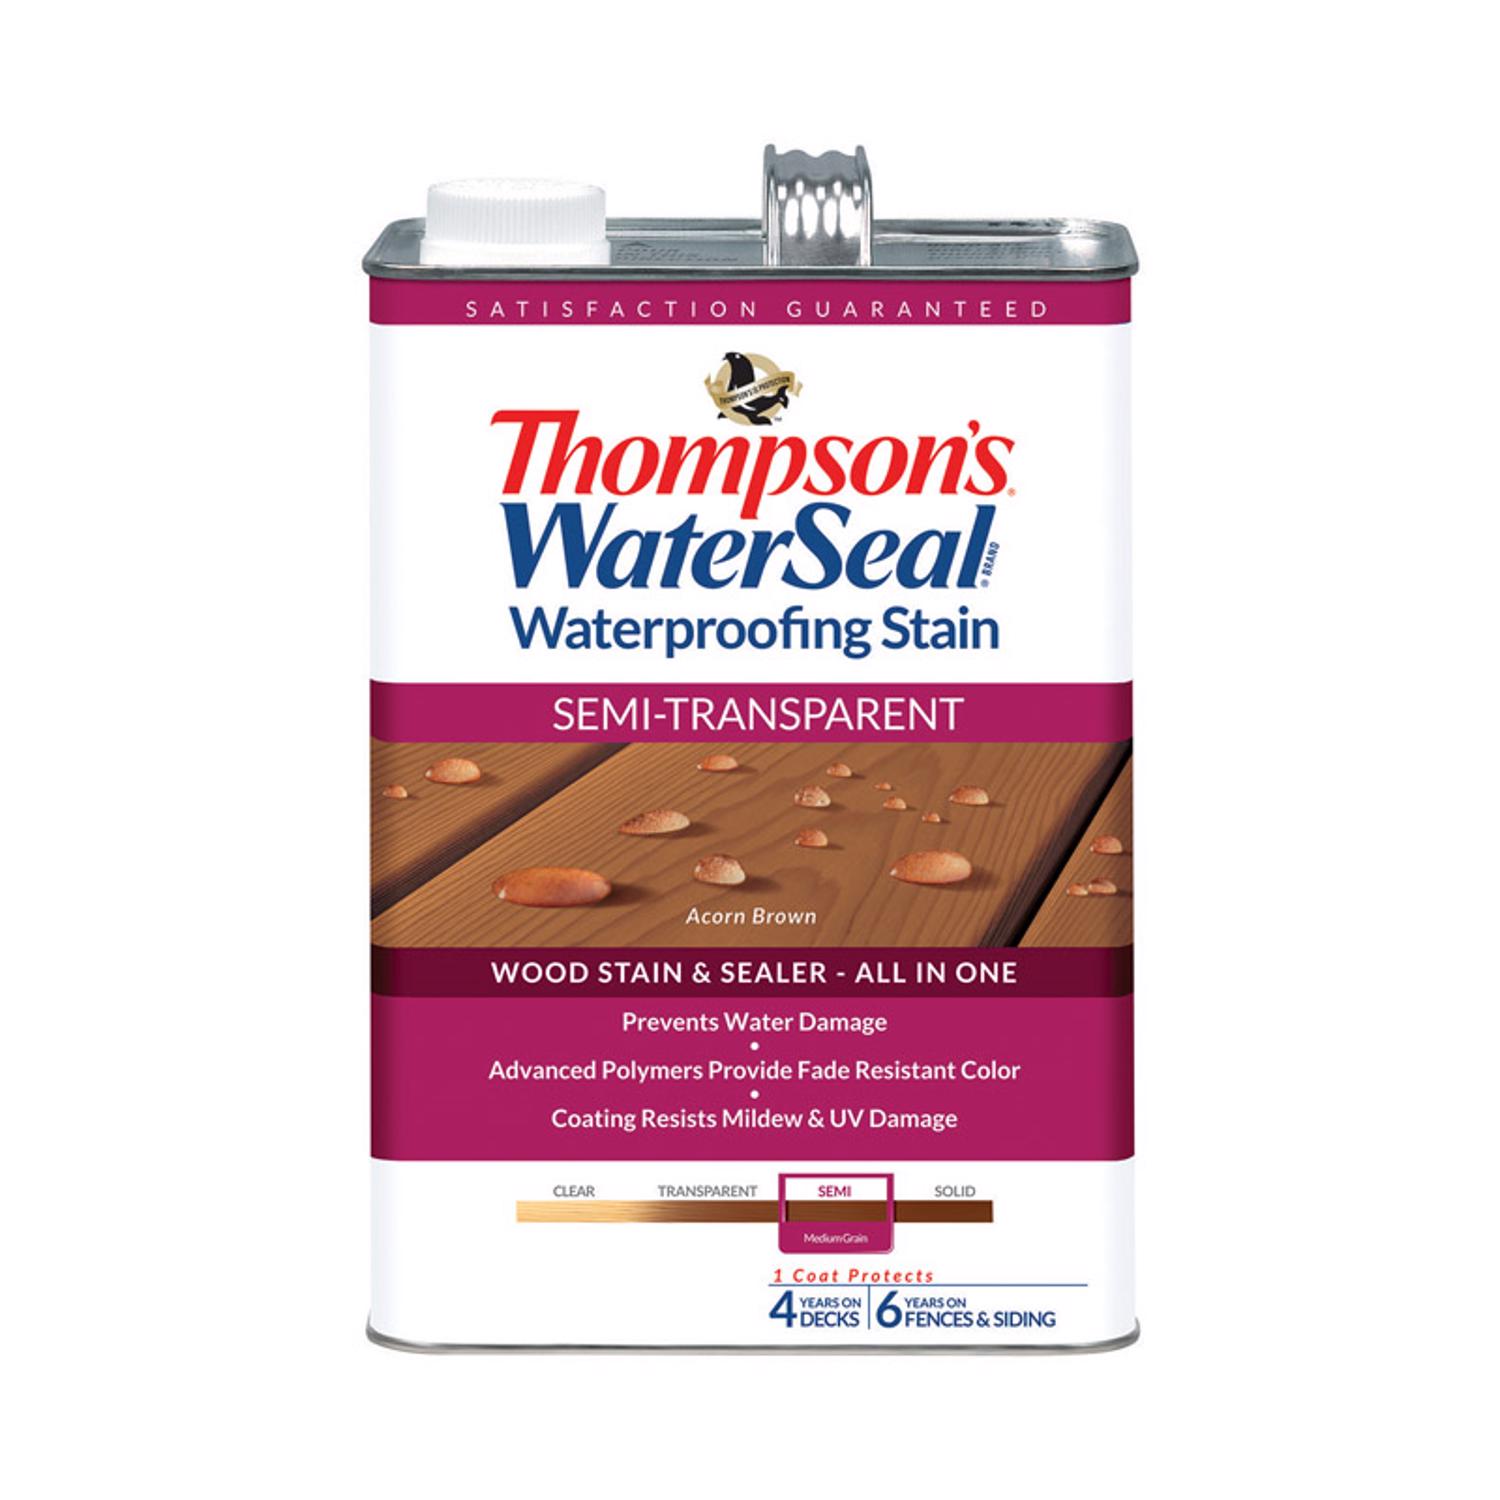 Thompson's WaterSeal Semi-Transparent Waterproofing Wood Stain and Sealer,  Chestnut Brown, 1 Gallon